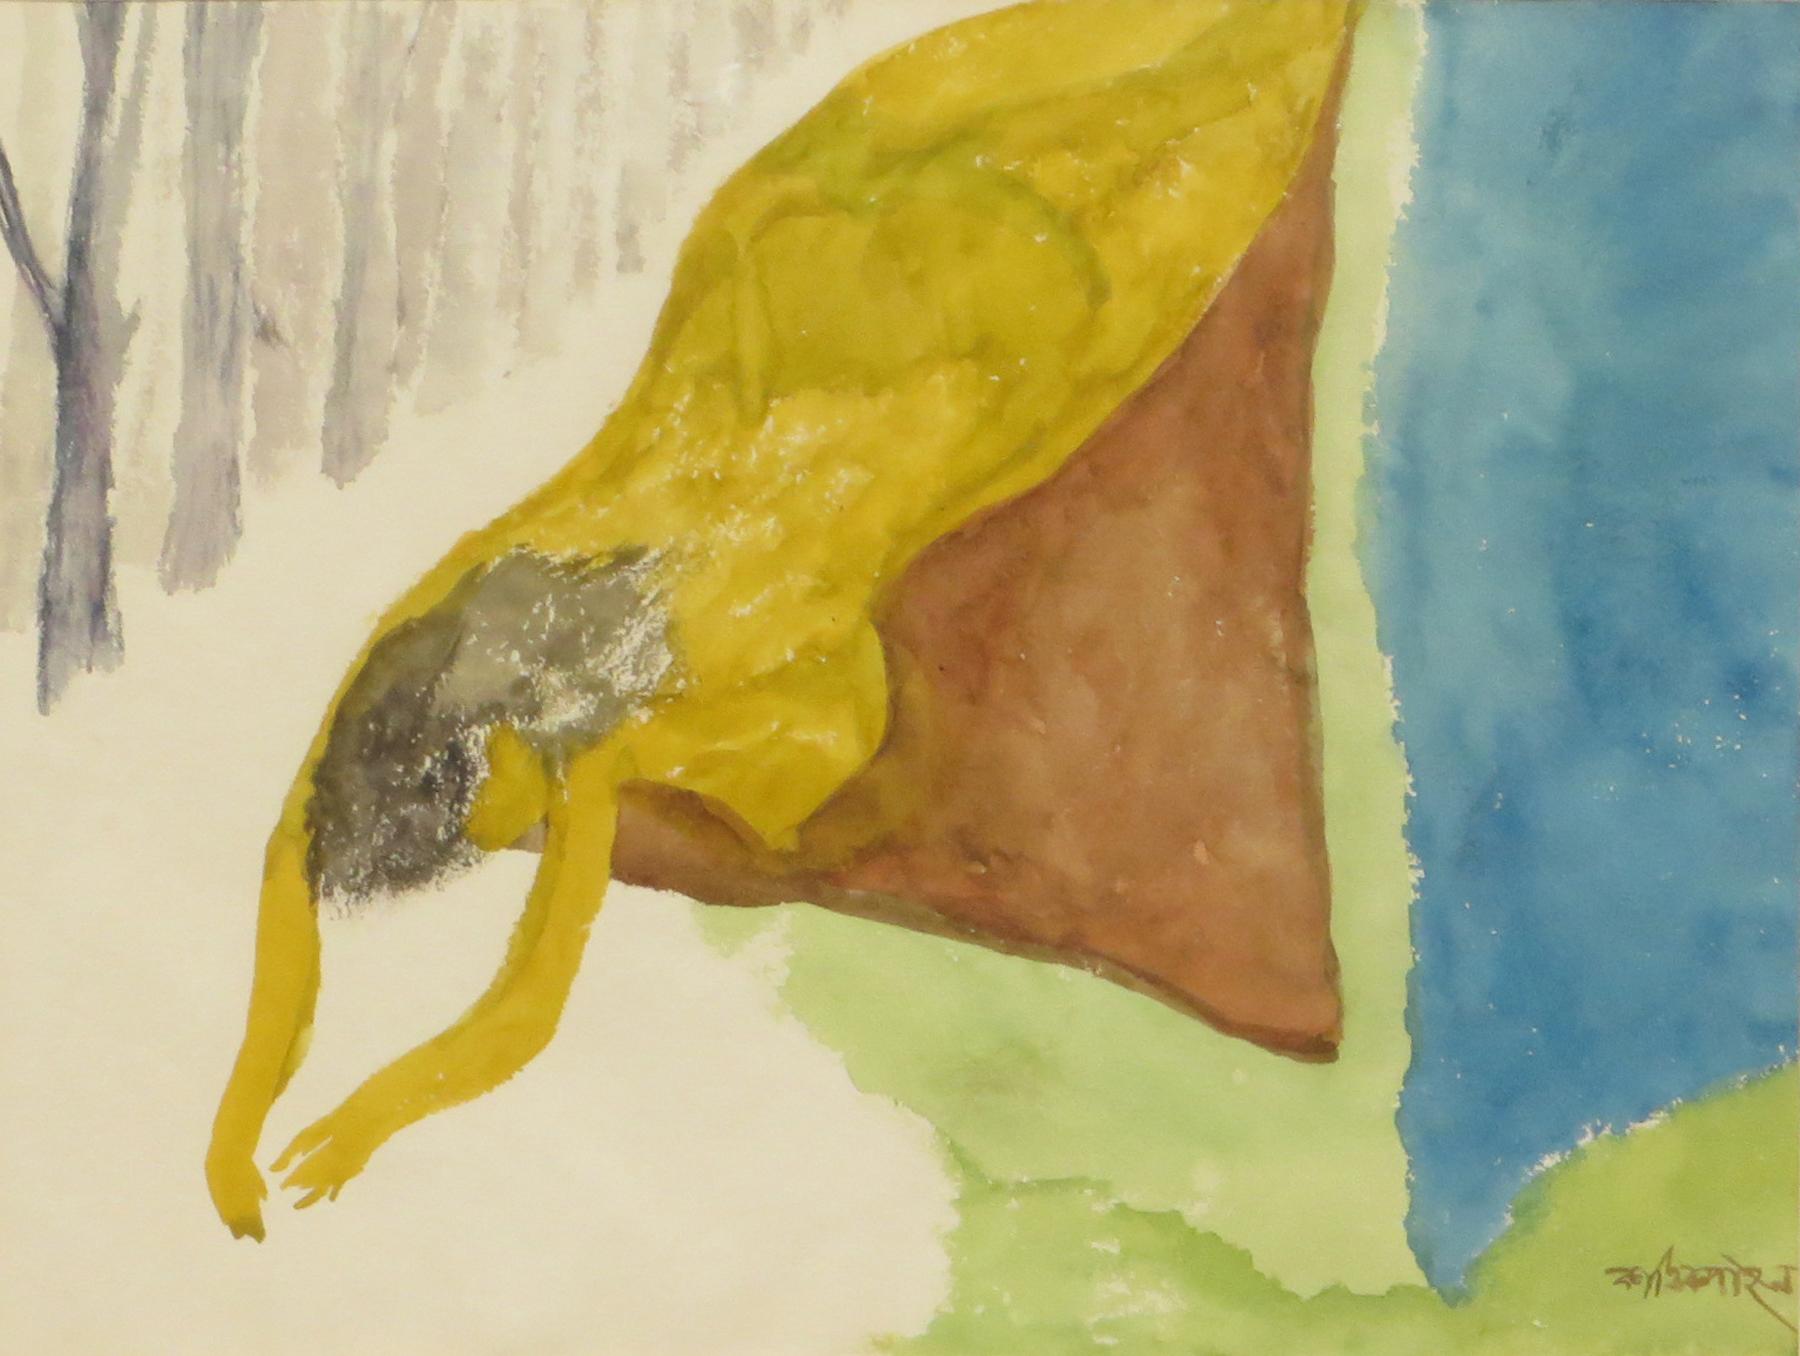 Nude Woman, Reclining, Water color on Rice paper, Green, Yellow, Blue 